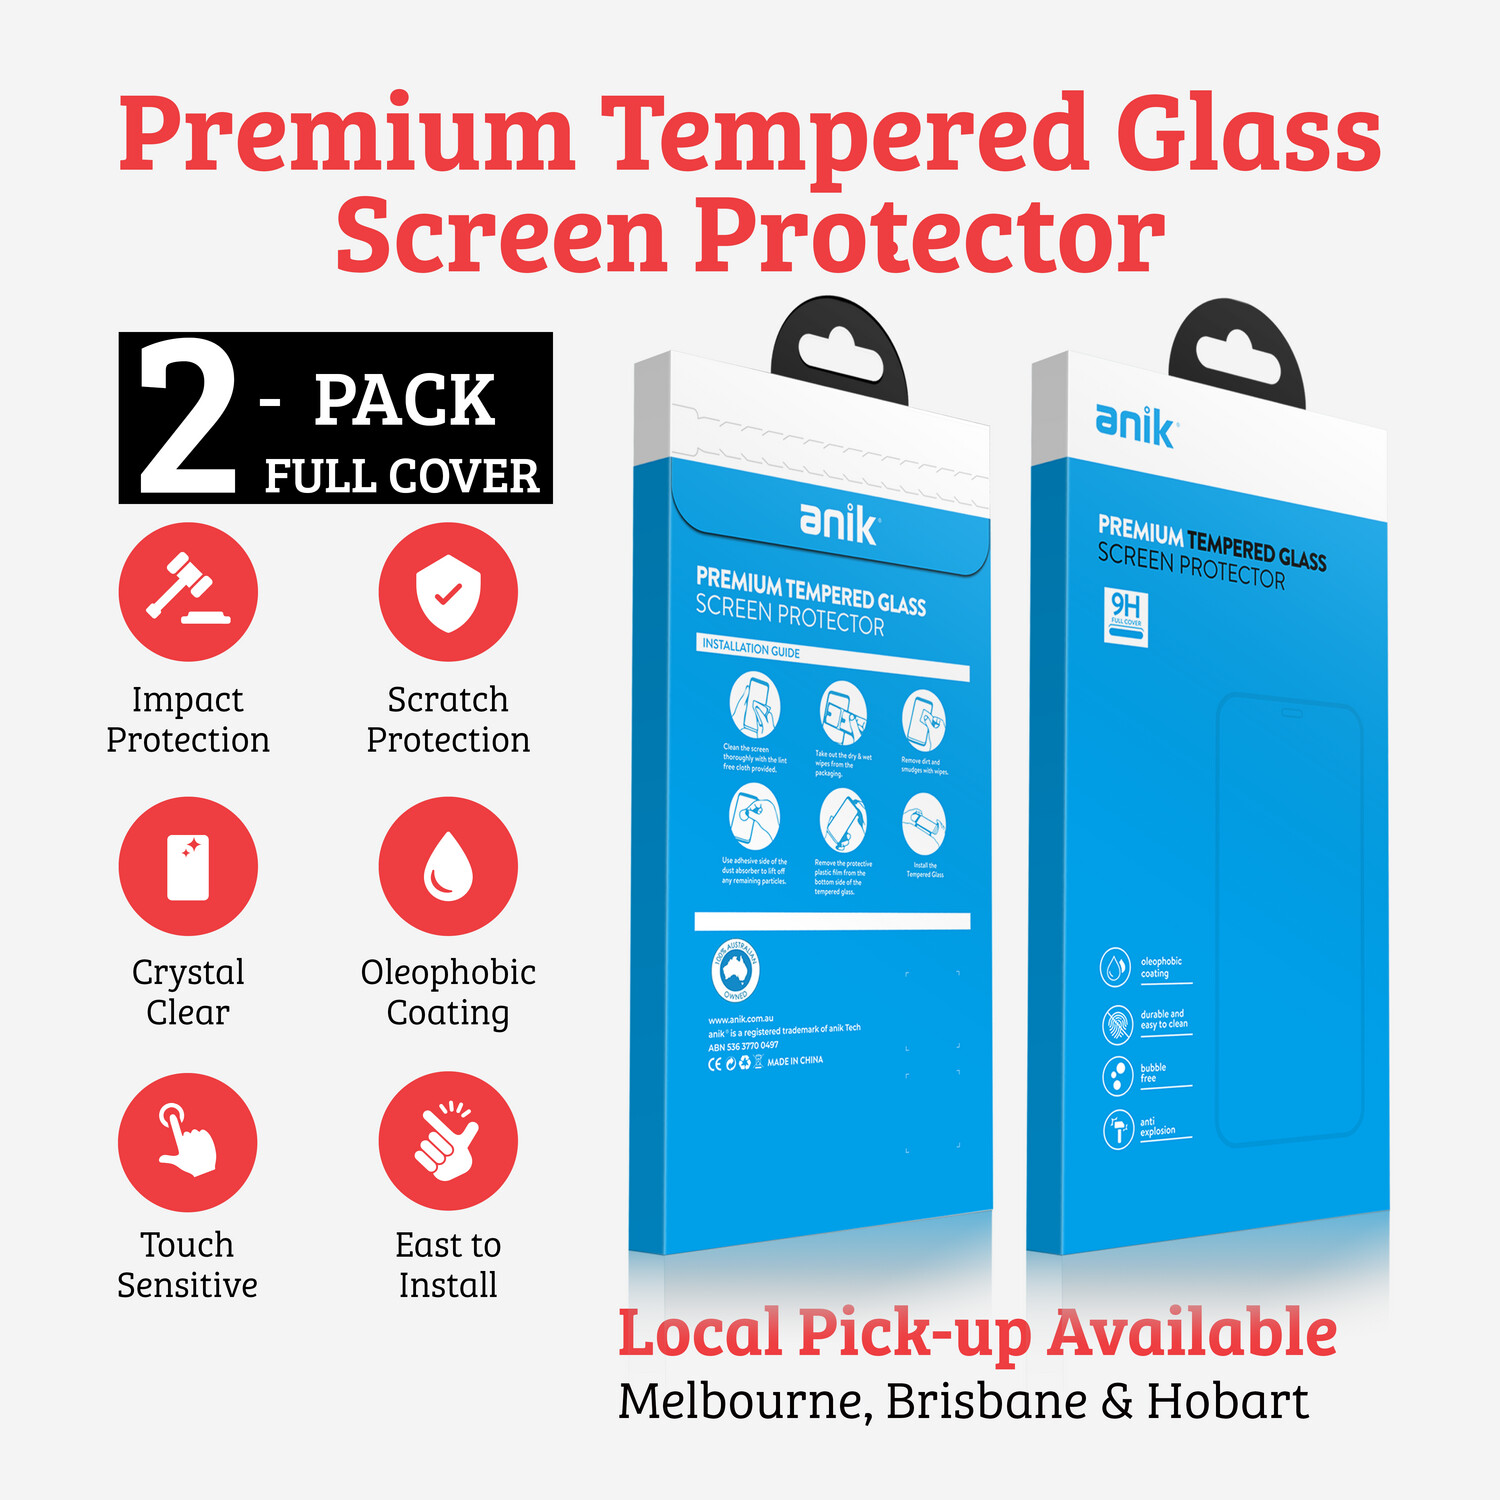 ANIK Premium Full Cover Tempered Glass Screen Protector for Xiaomi Redmi Note 5 [2 Pack]